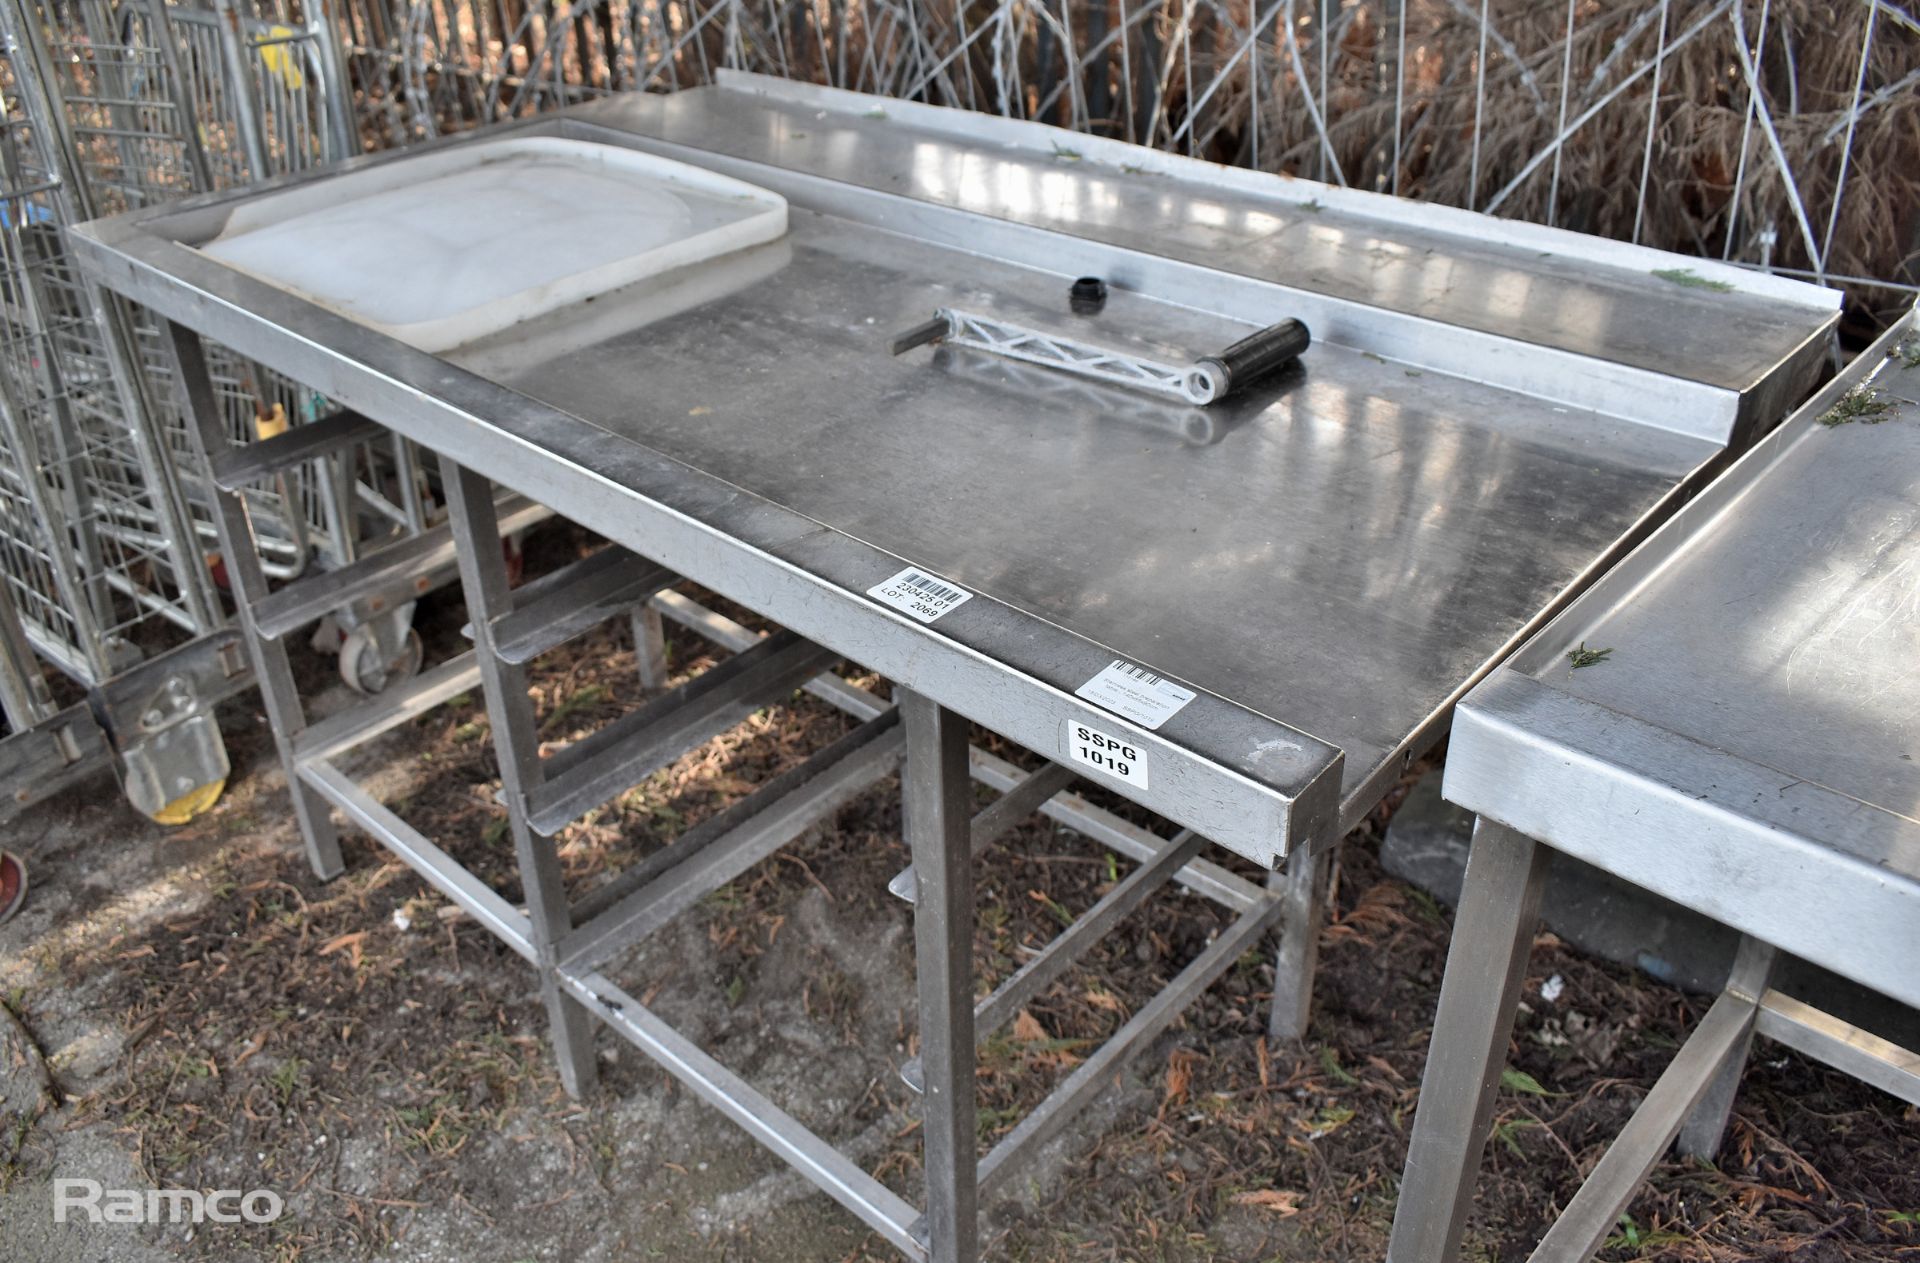 Stainless steel table section with tray inserts - 140 x 85 x 90cm - Image 4 of 4